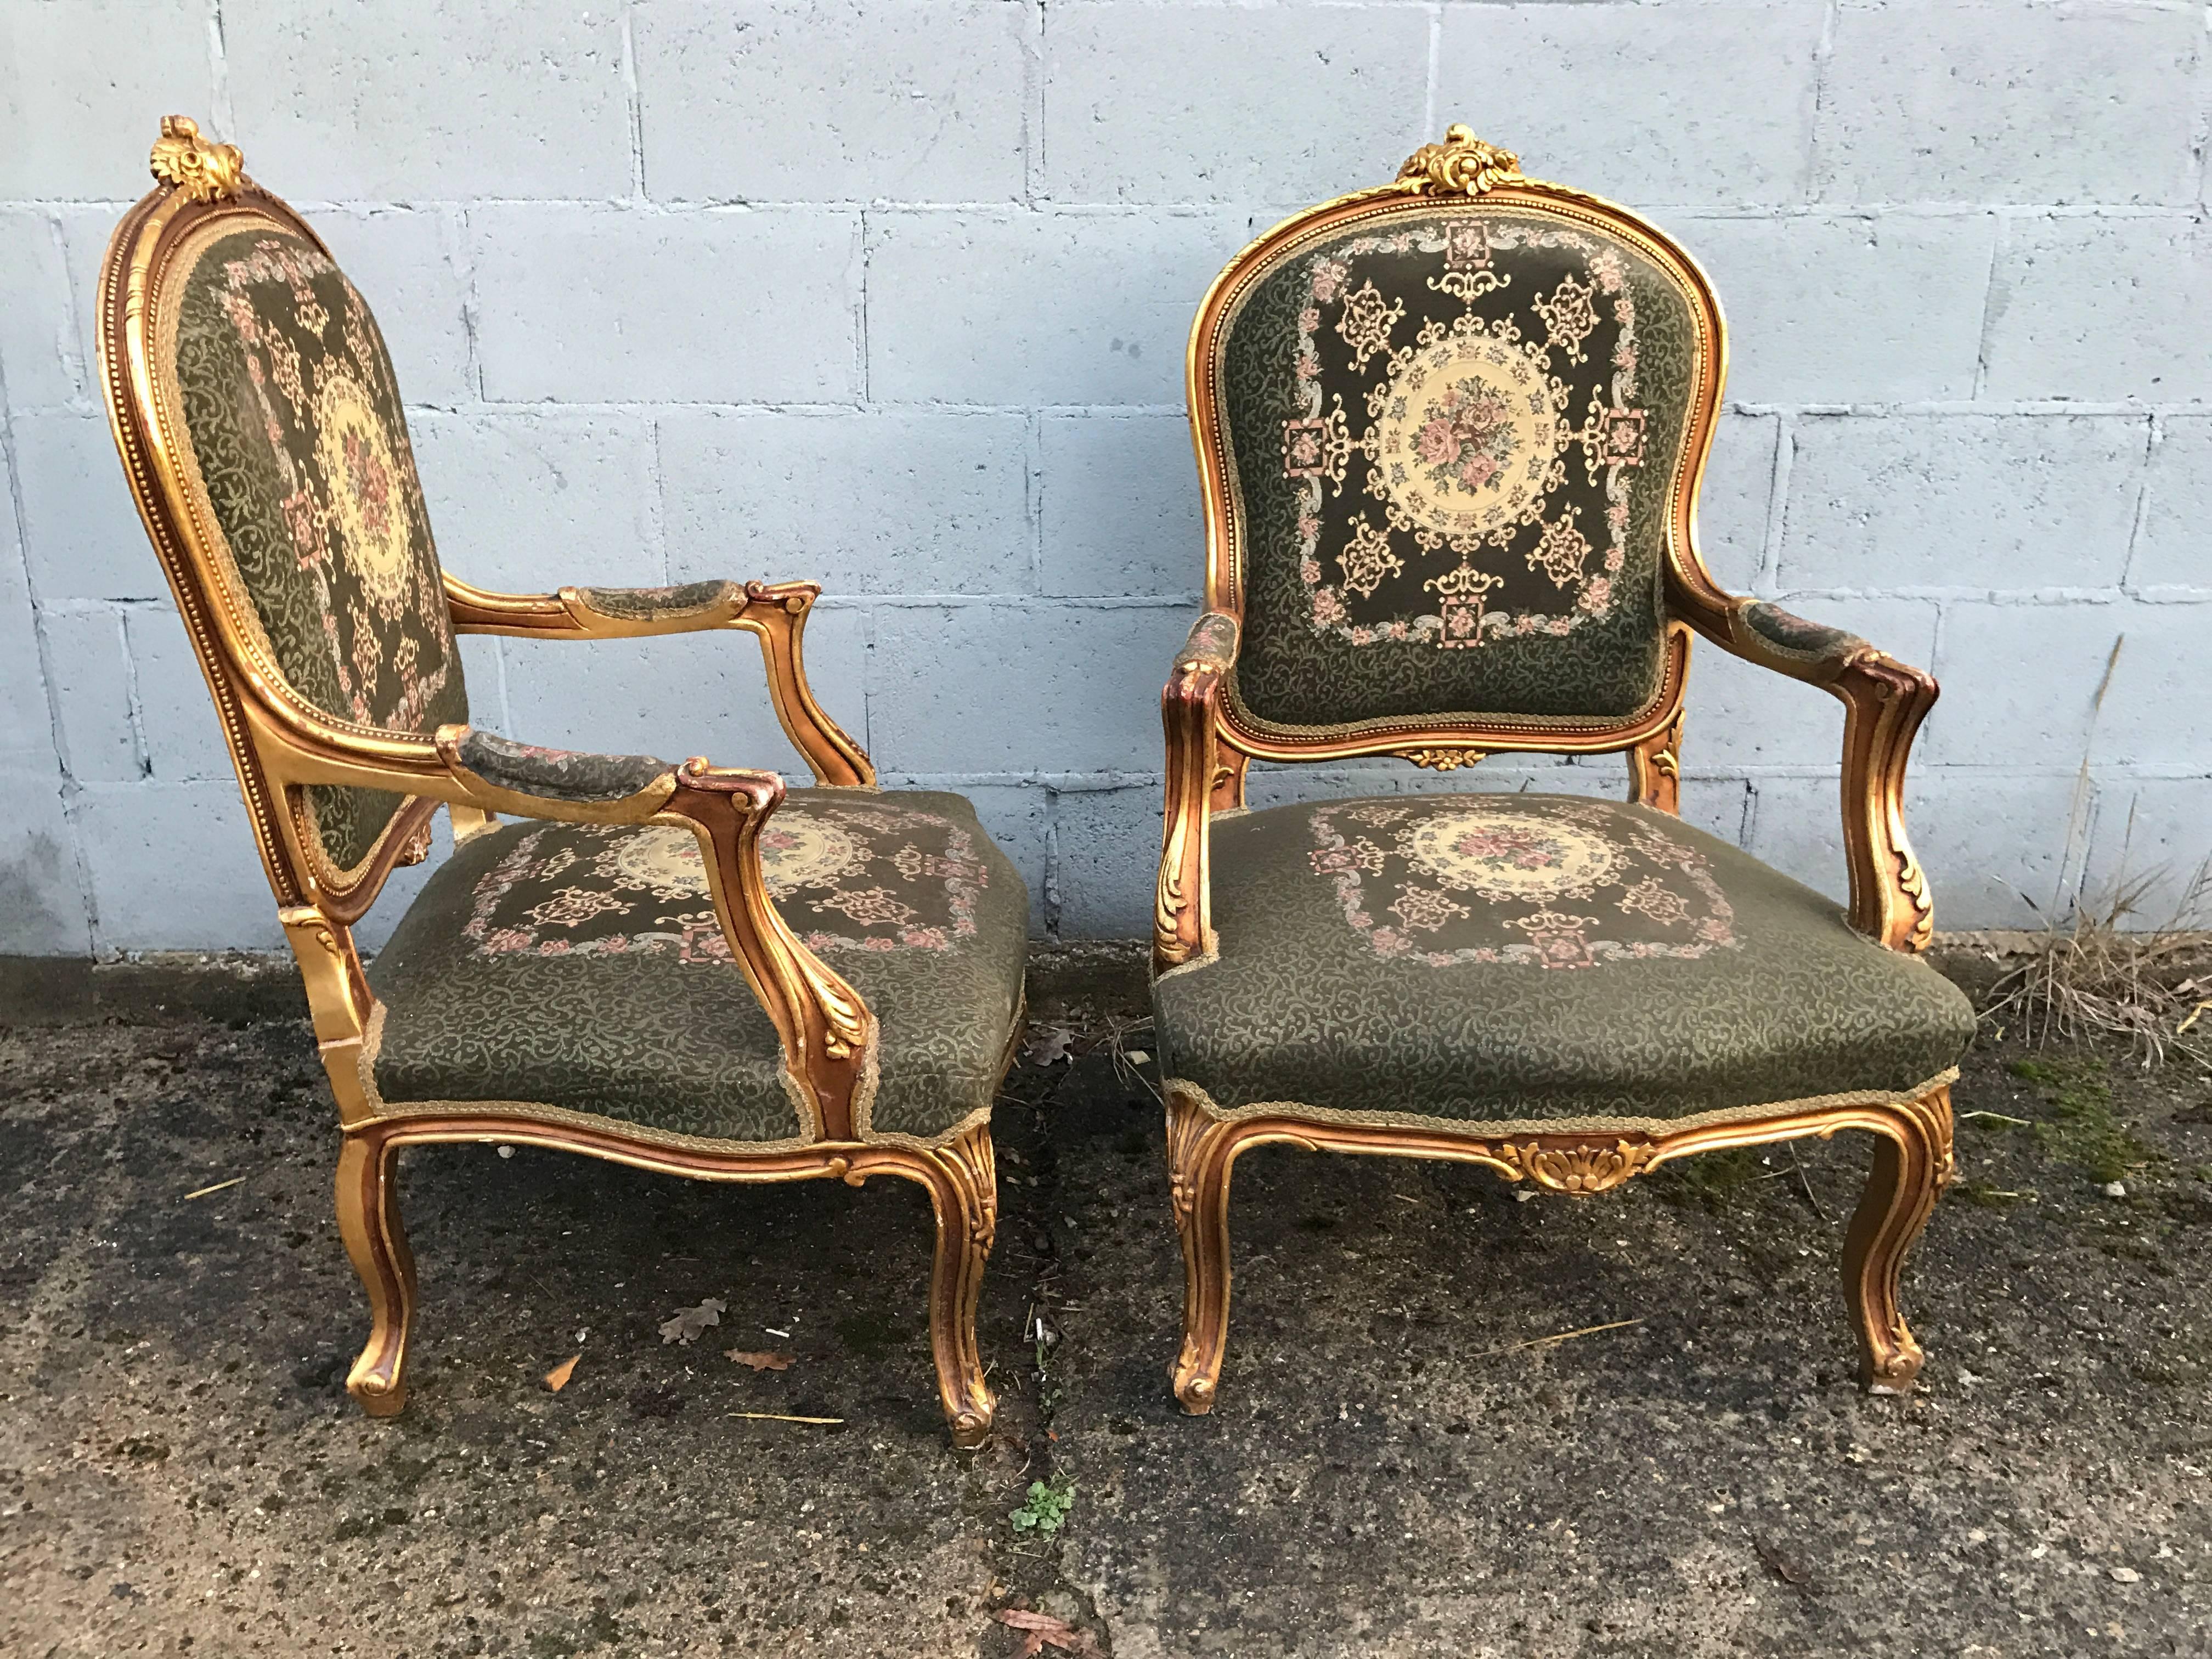 Here we have a beautiful French Rococo pair of chairs. The giltwood work is in fantastic condition, along with the beautiful fabric. 

Matching sofa in another listing.